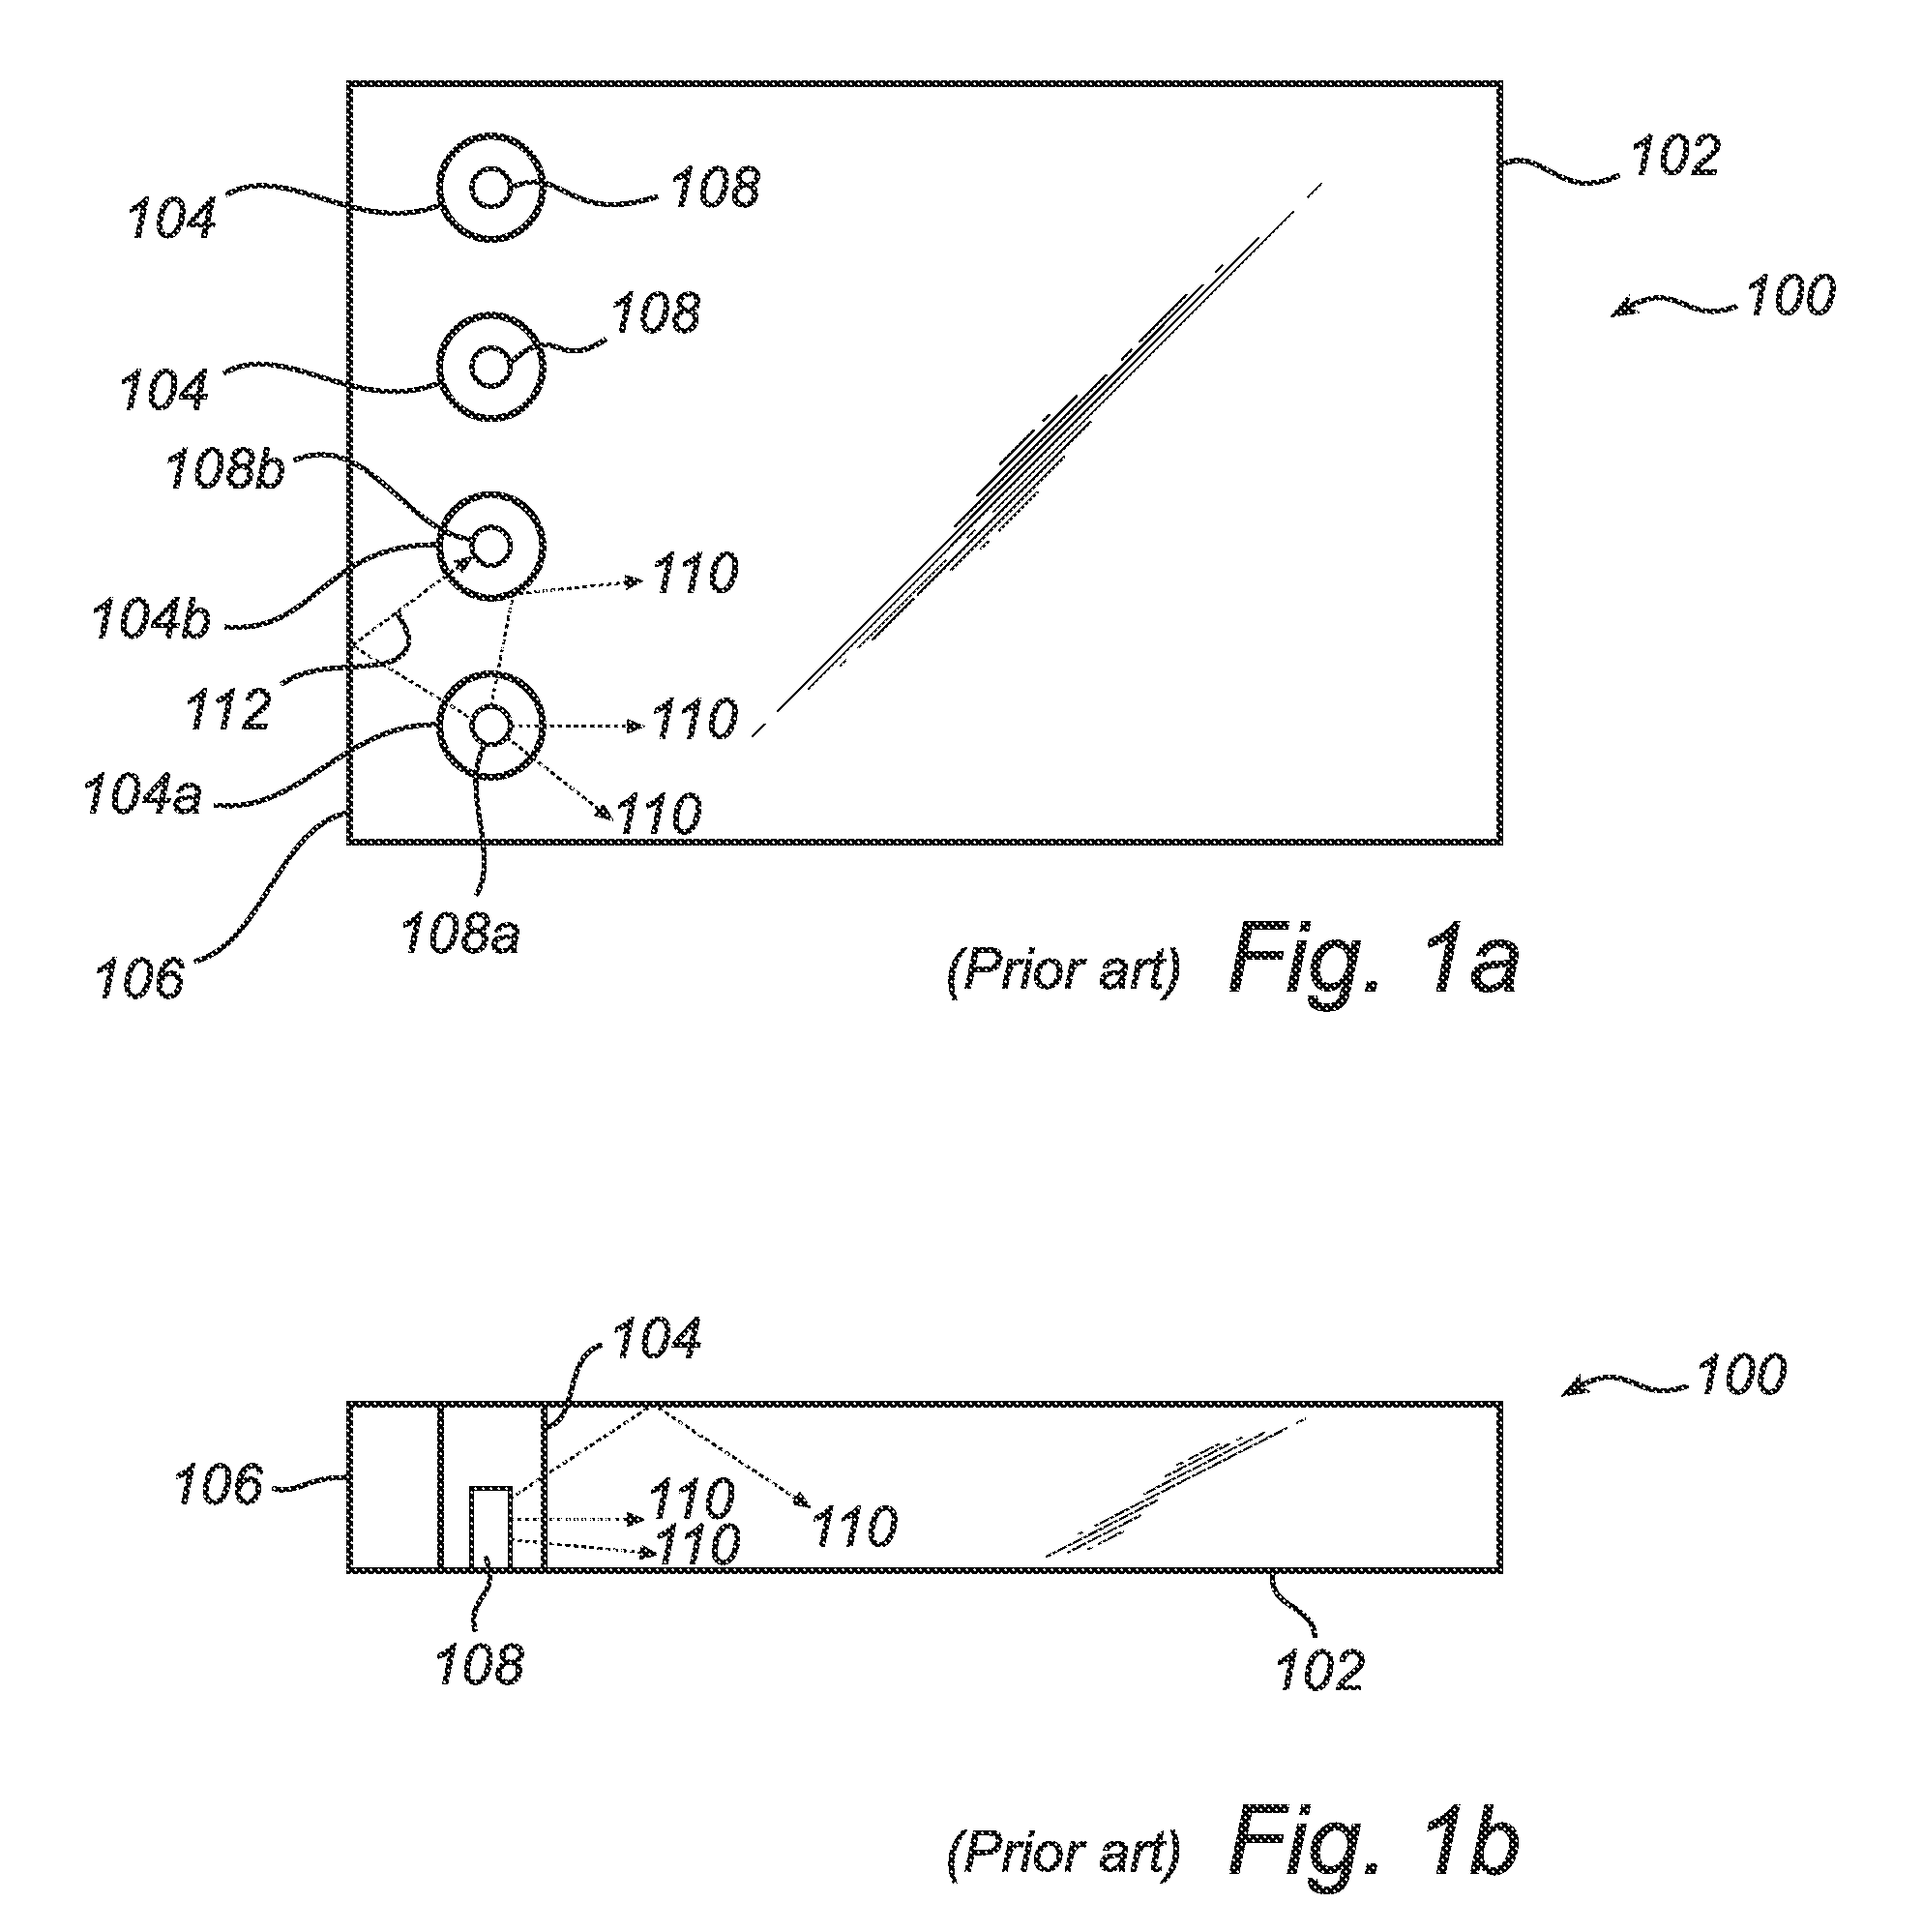 Lighting device employing a light guide plate and a plurality of light emitting diodes